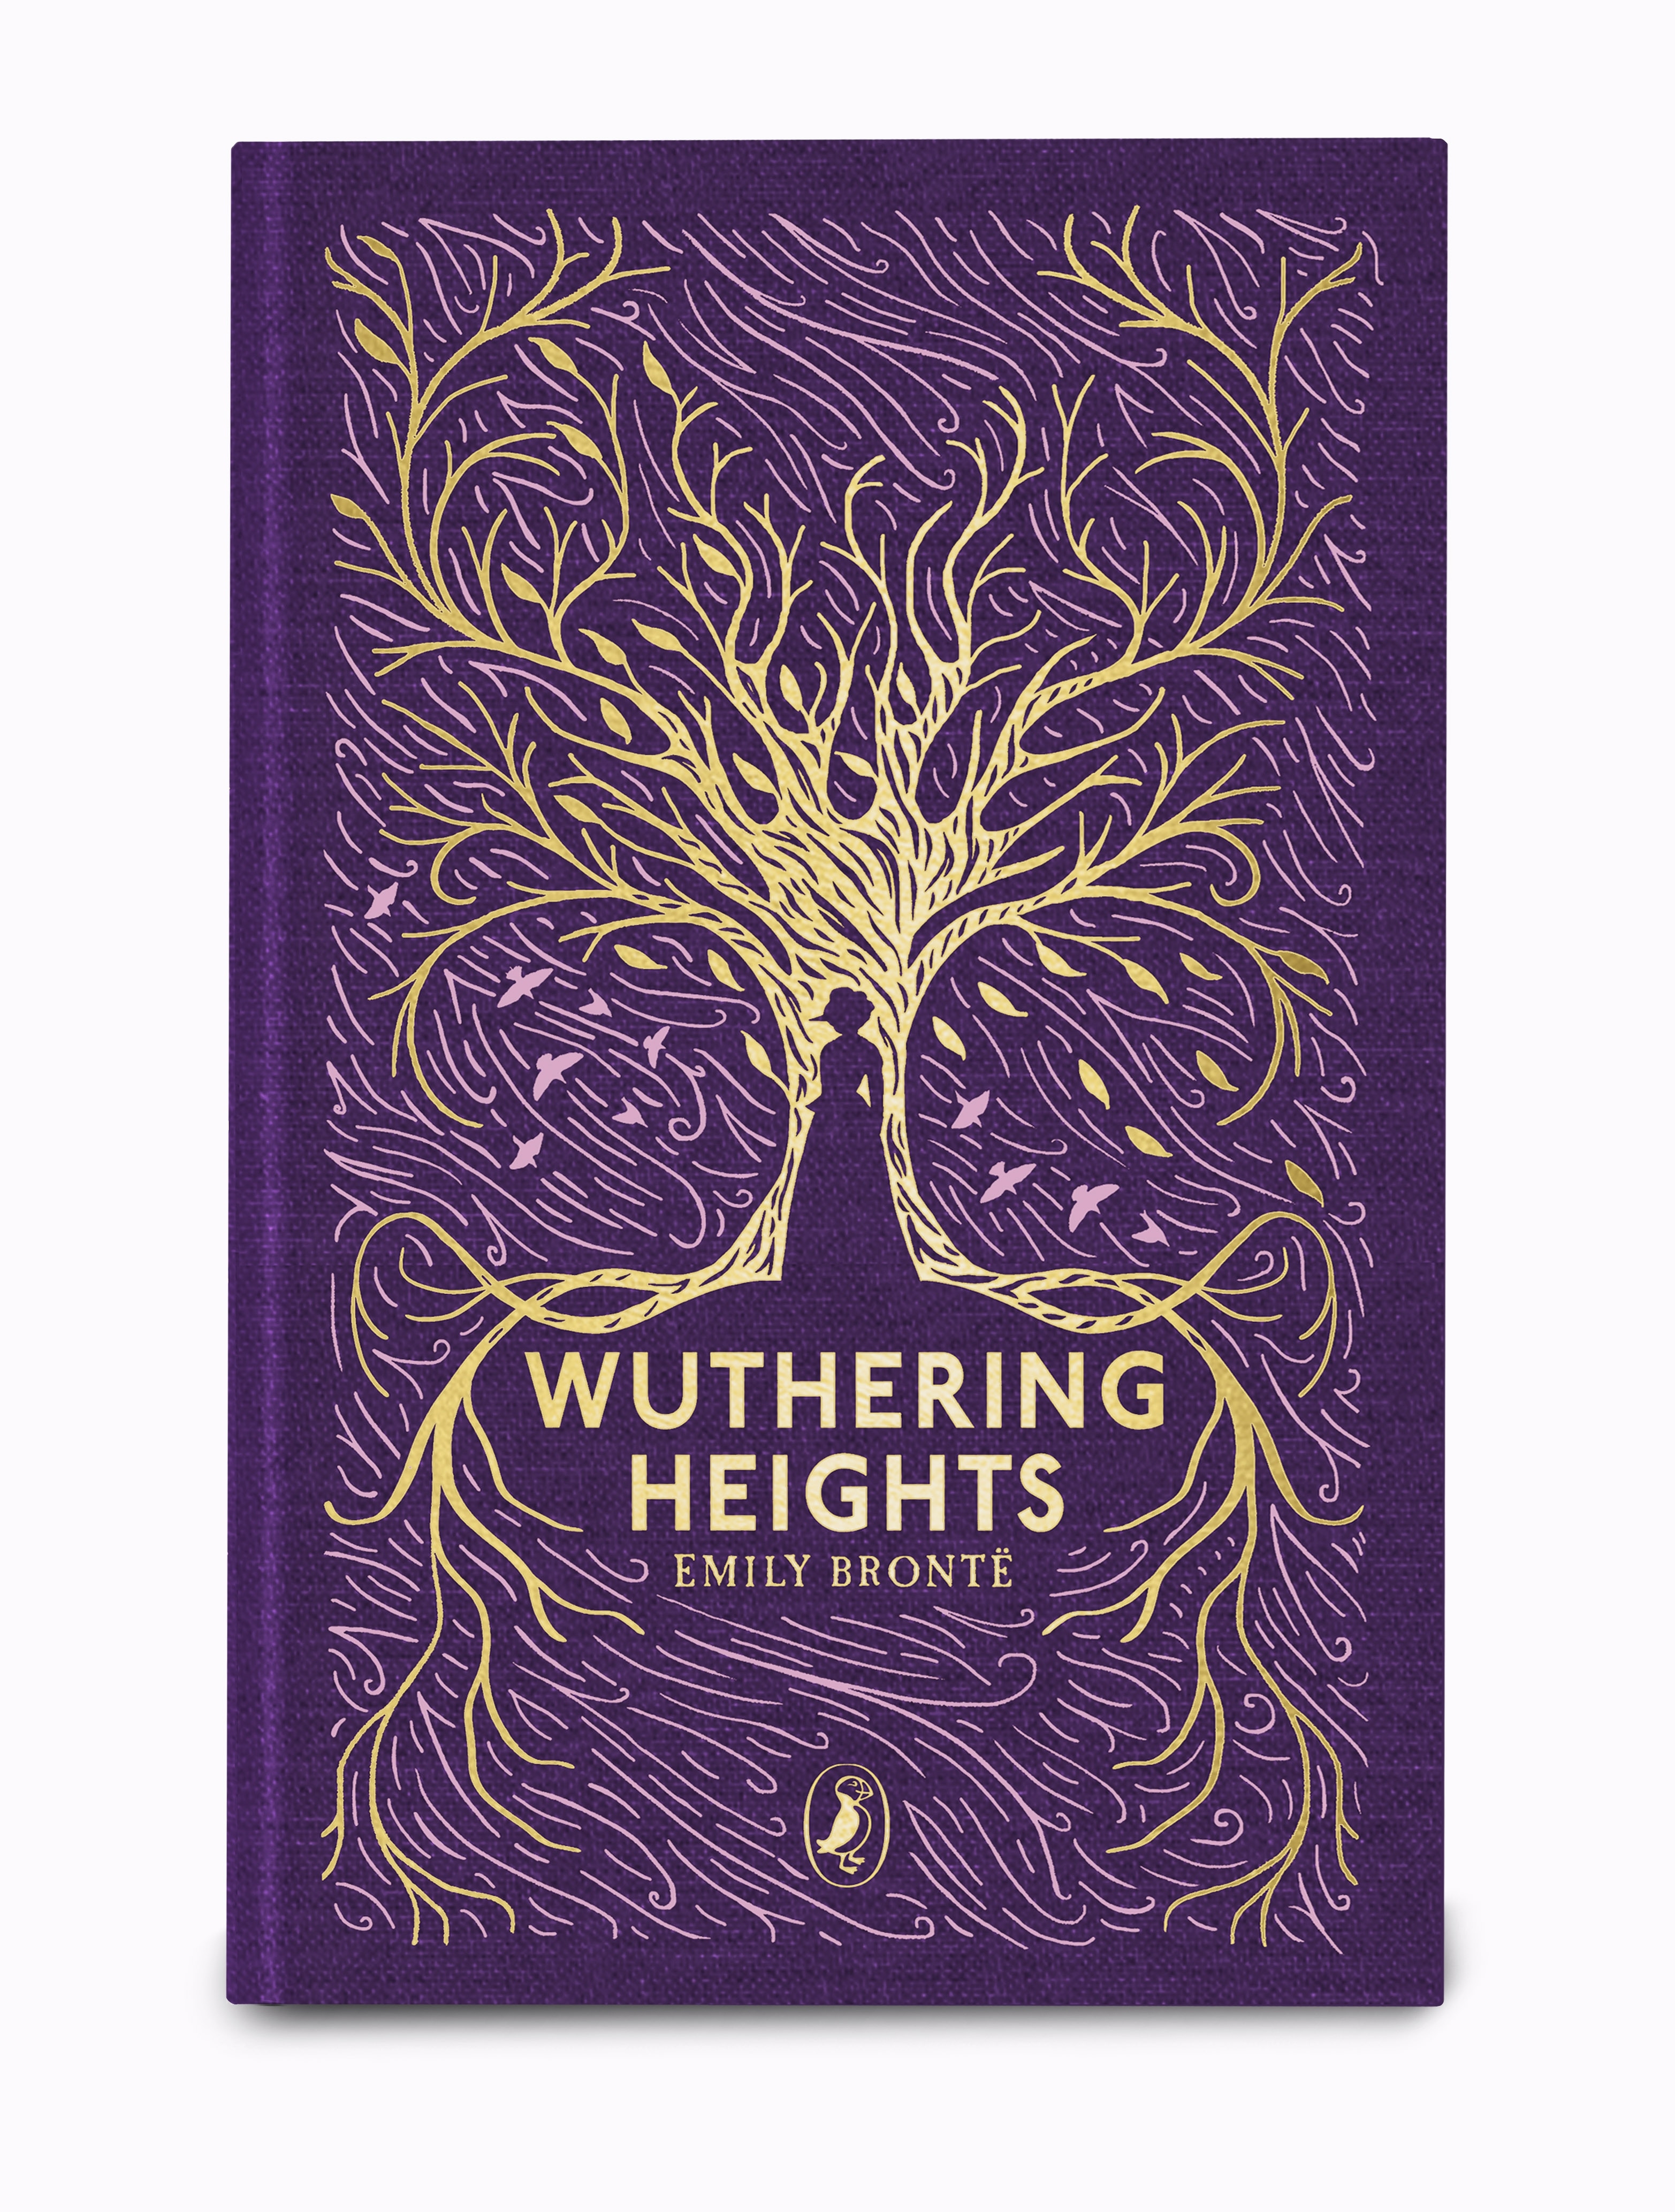 Book “Wuthering Heights” by Emily Brontë, S.E. Hinton — September 3, 2020